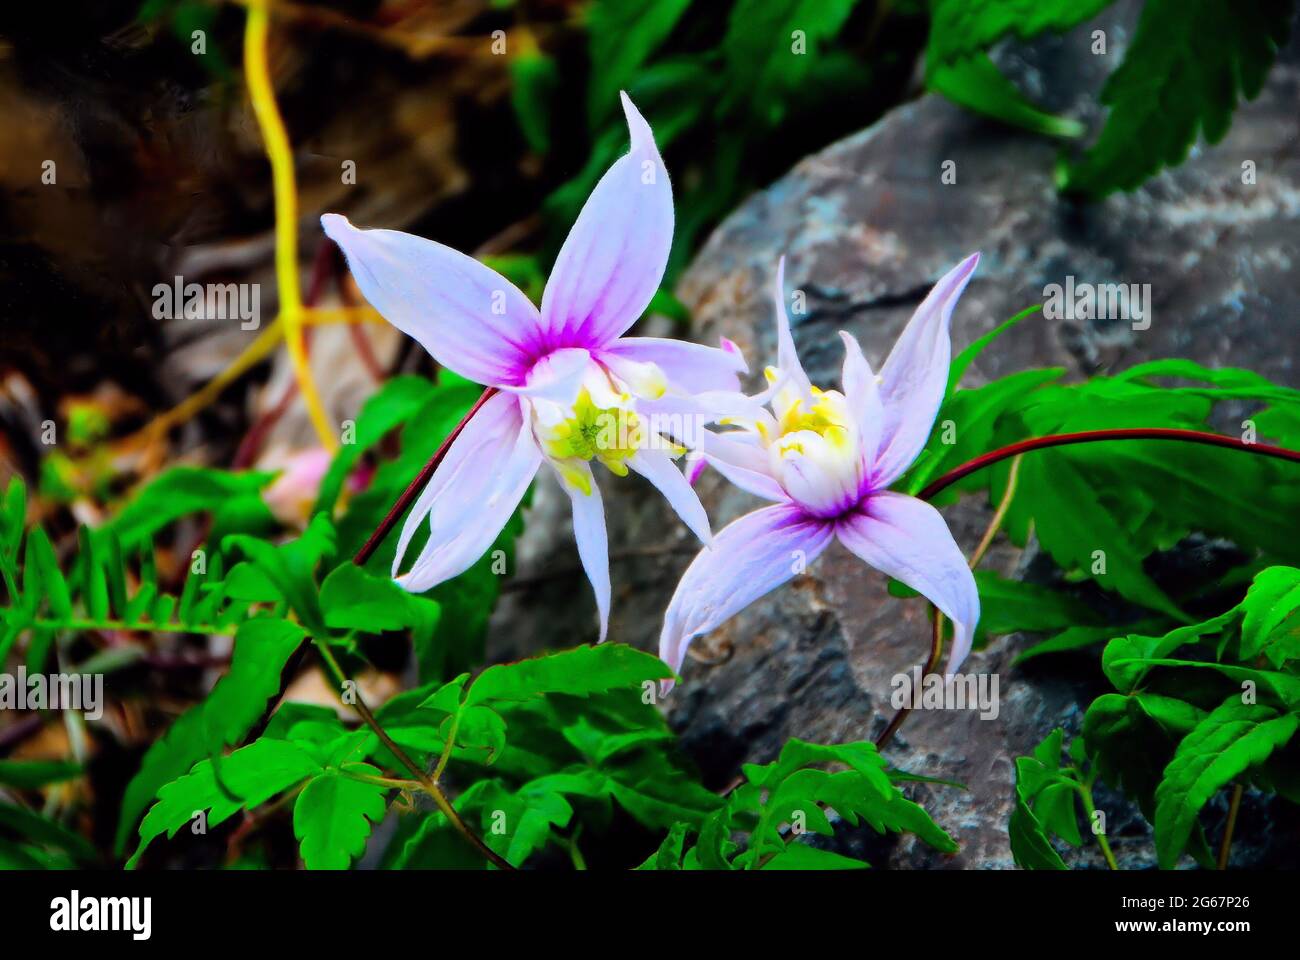 Two white Clematis flowers with some magenta on them growing on a vine across a rock in a local garden. Stock Photo